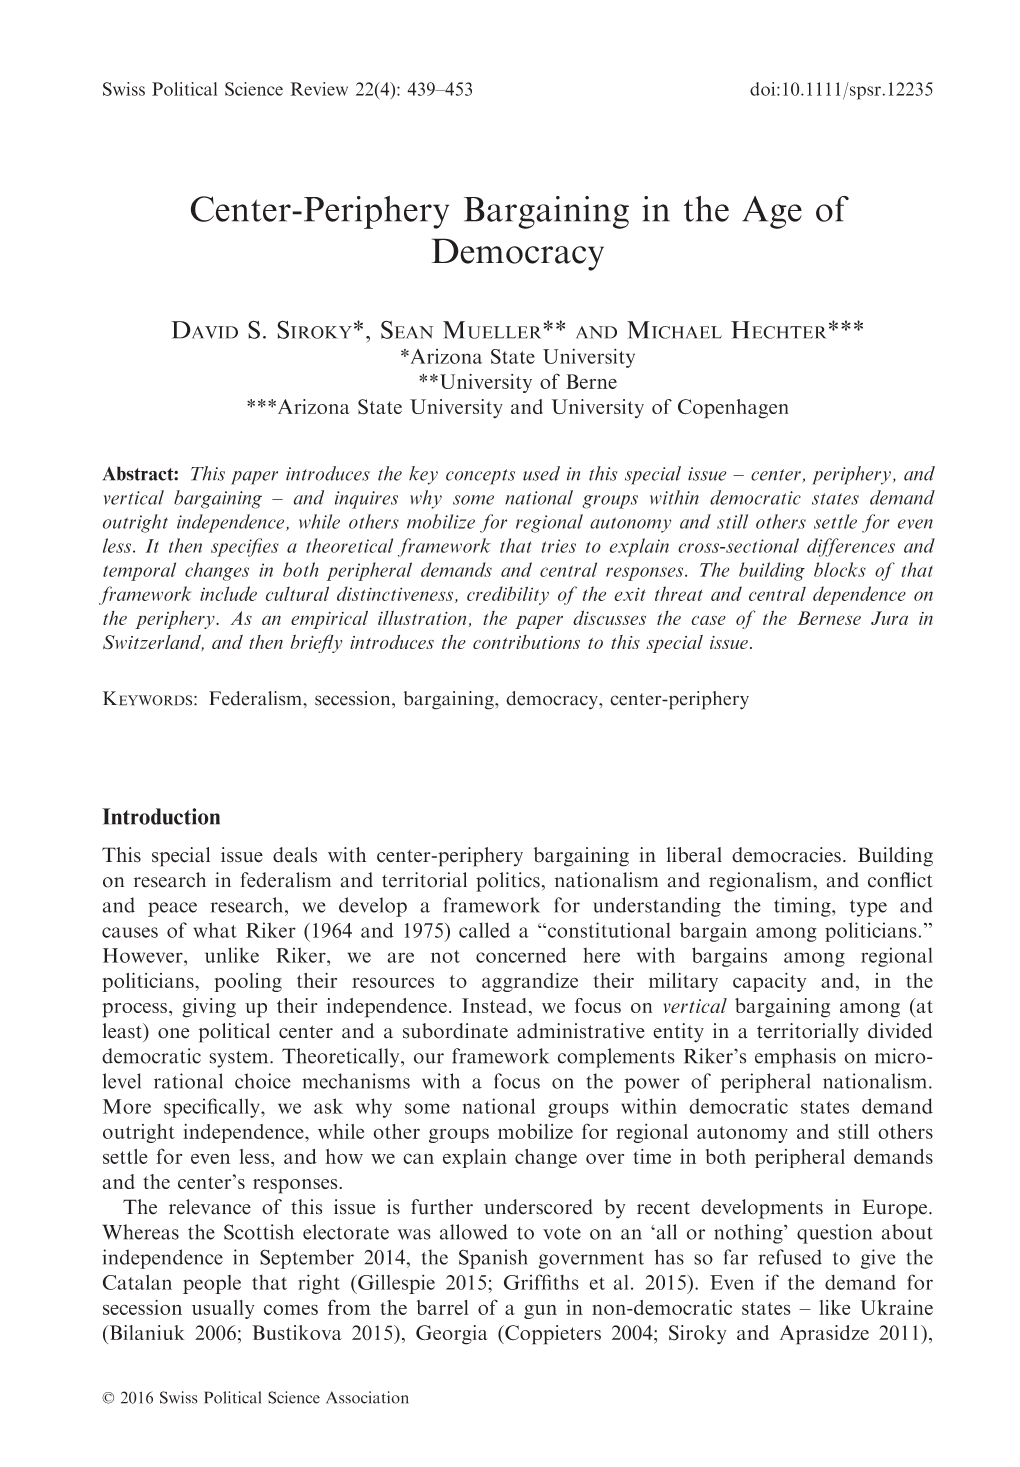 Center‐Periphery Bargaining in the Age Of